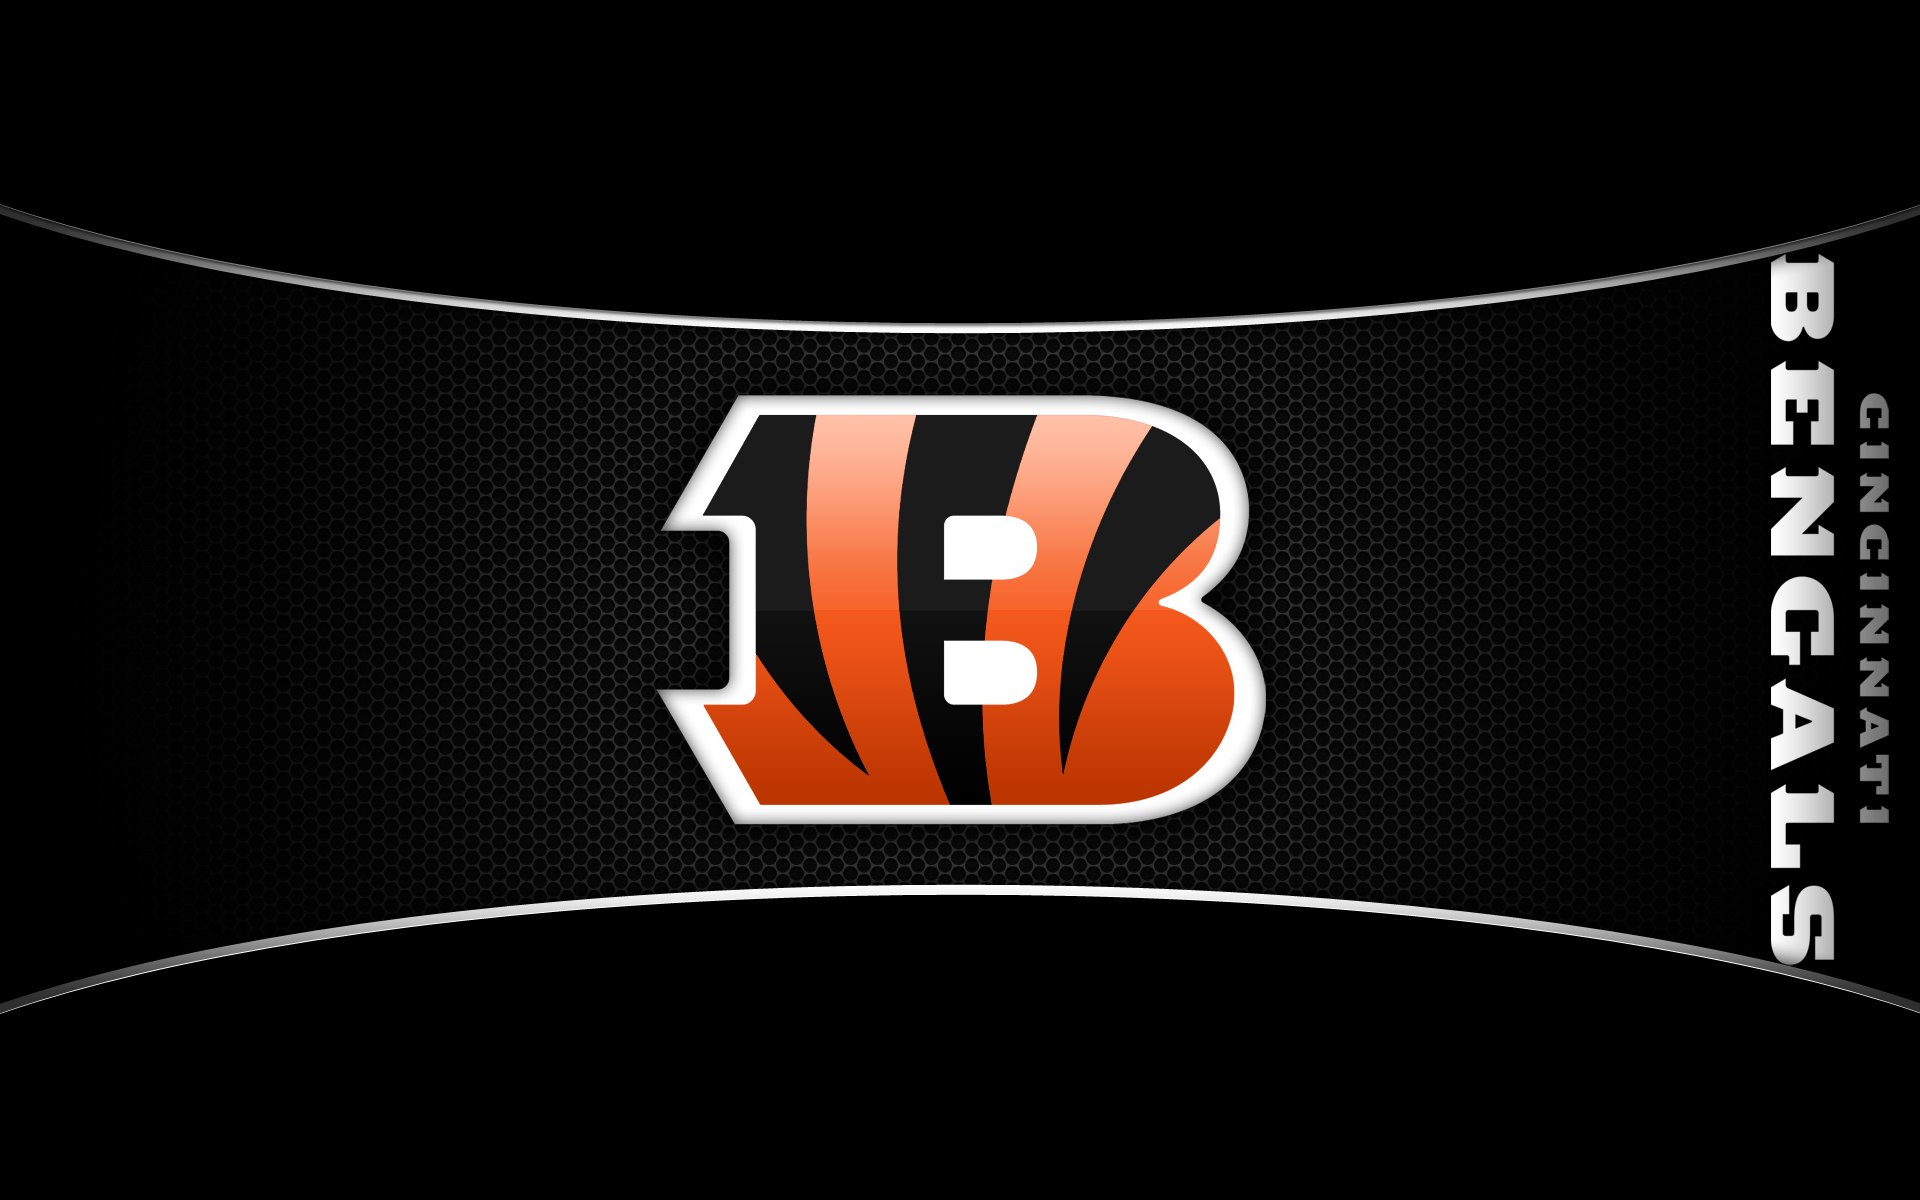 Bengals Football Logo Images amp Pictures   Becuo 1920x1200